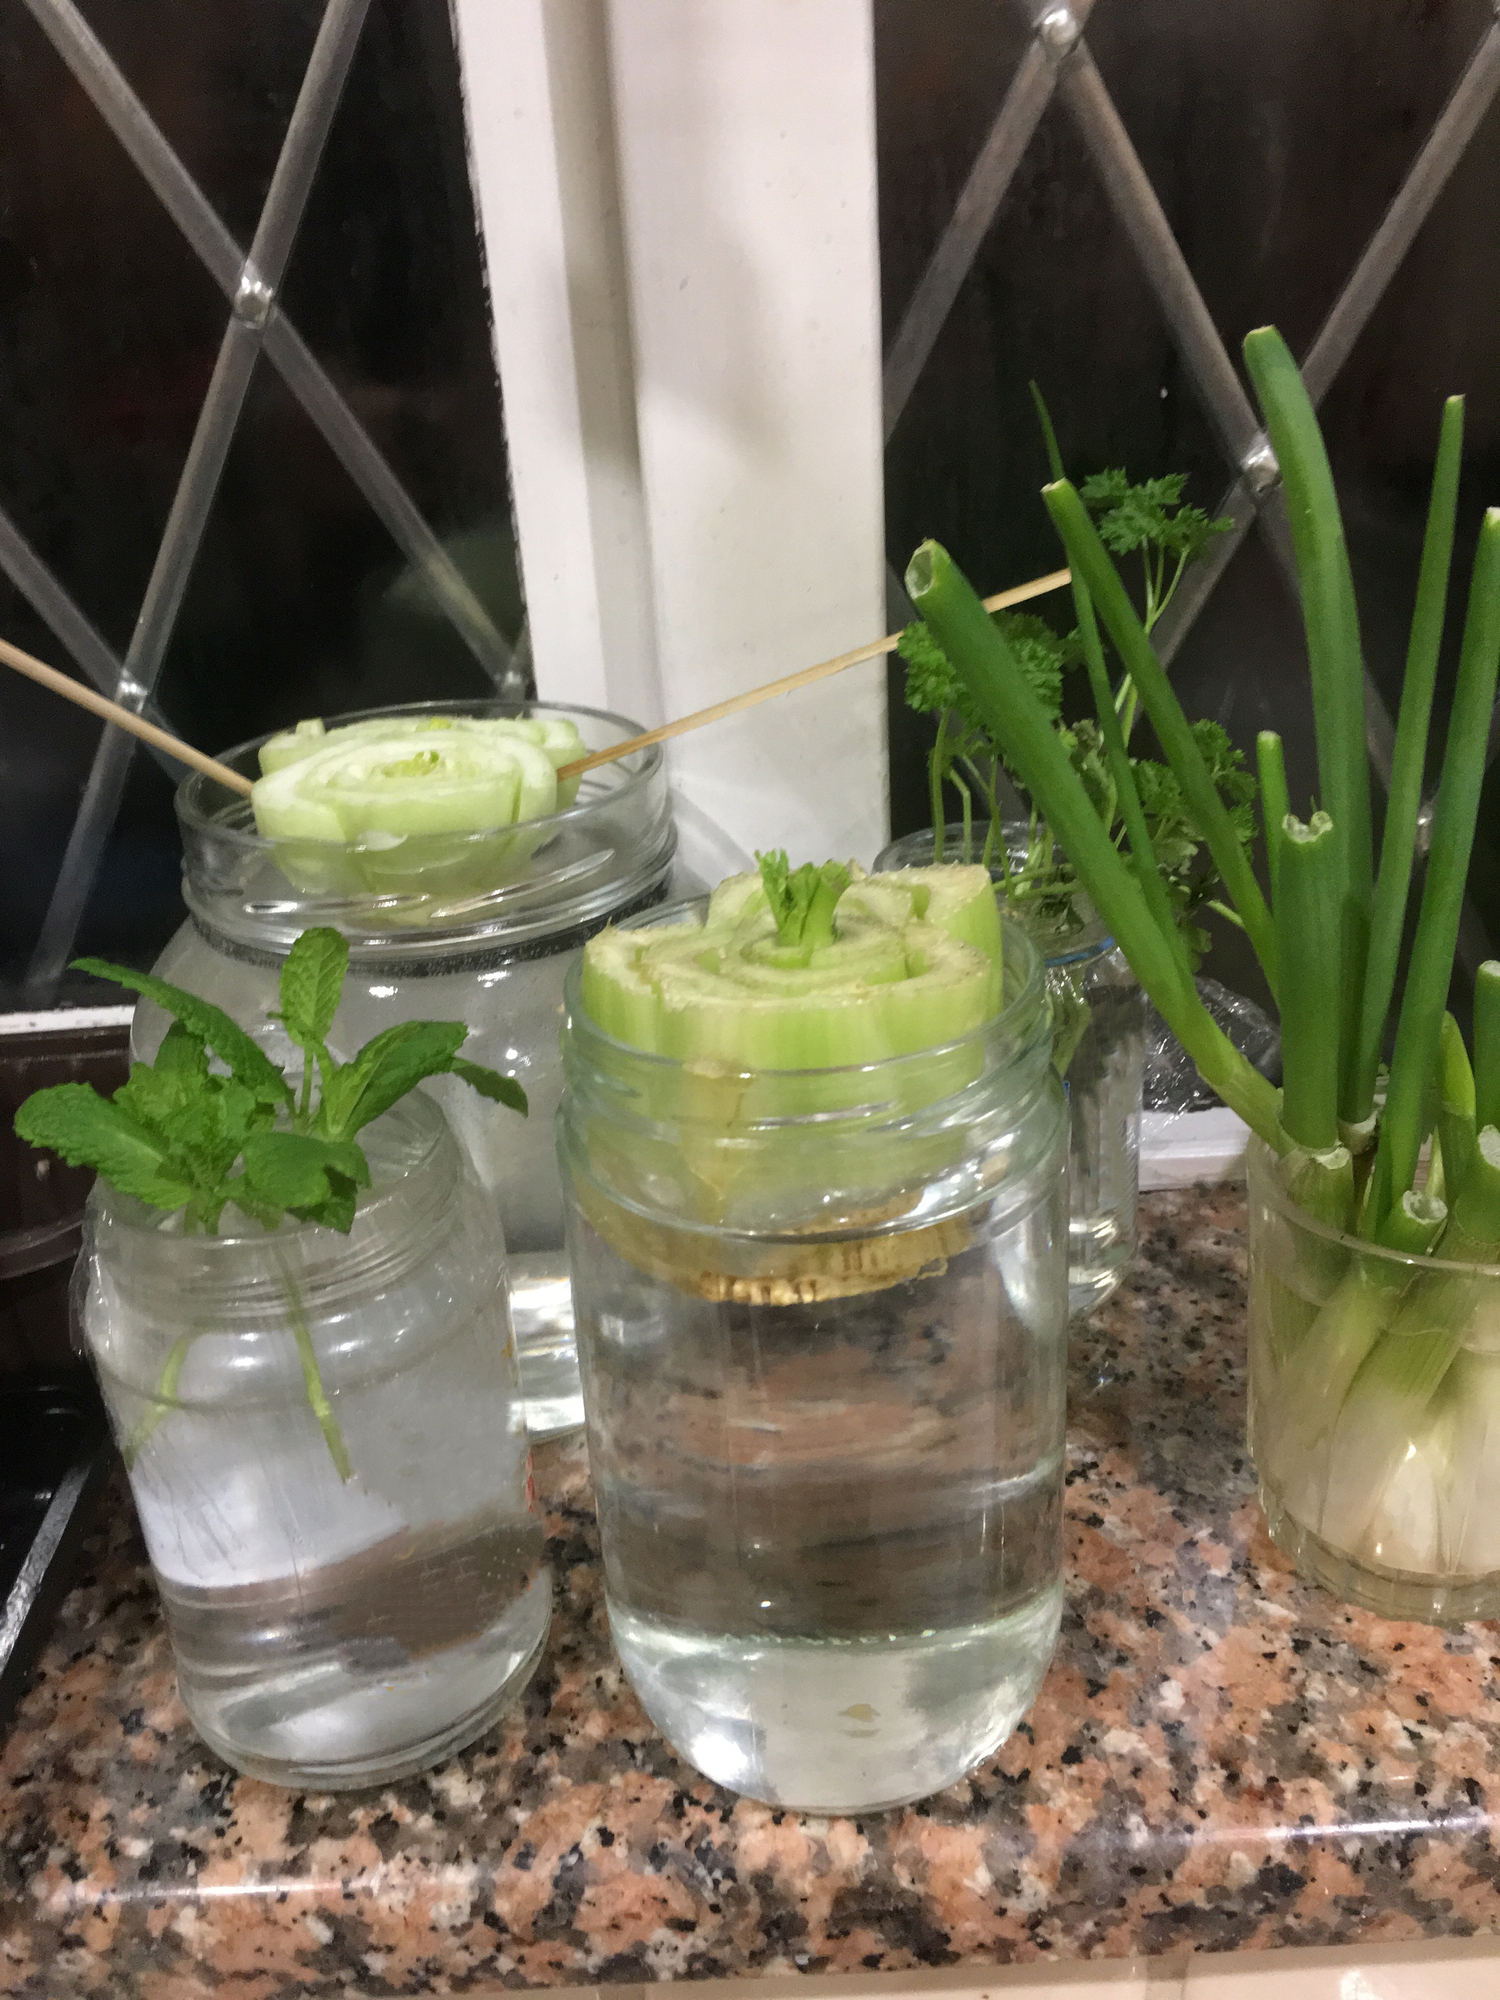 Herbs and vegetables in water in kitchen